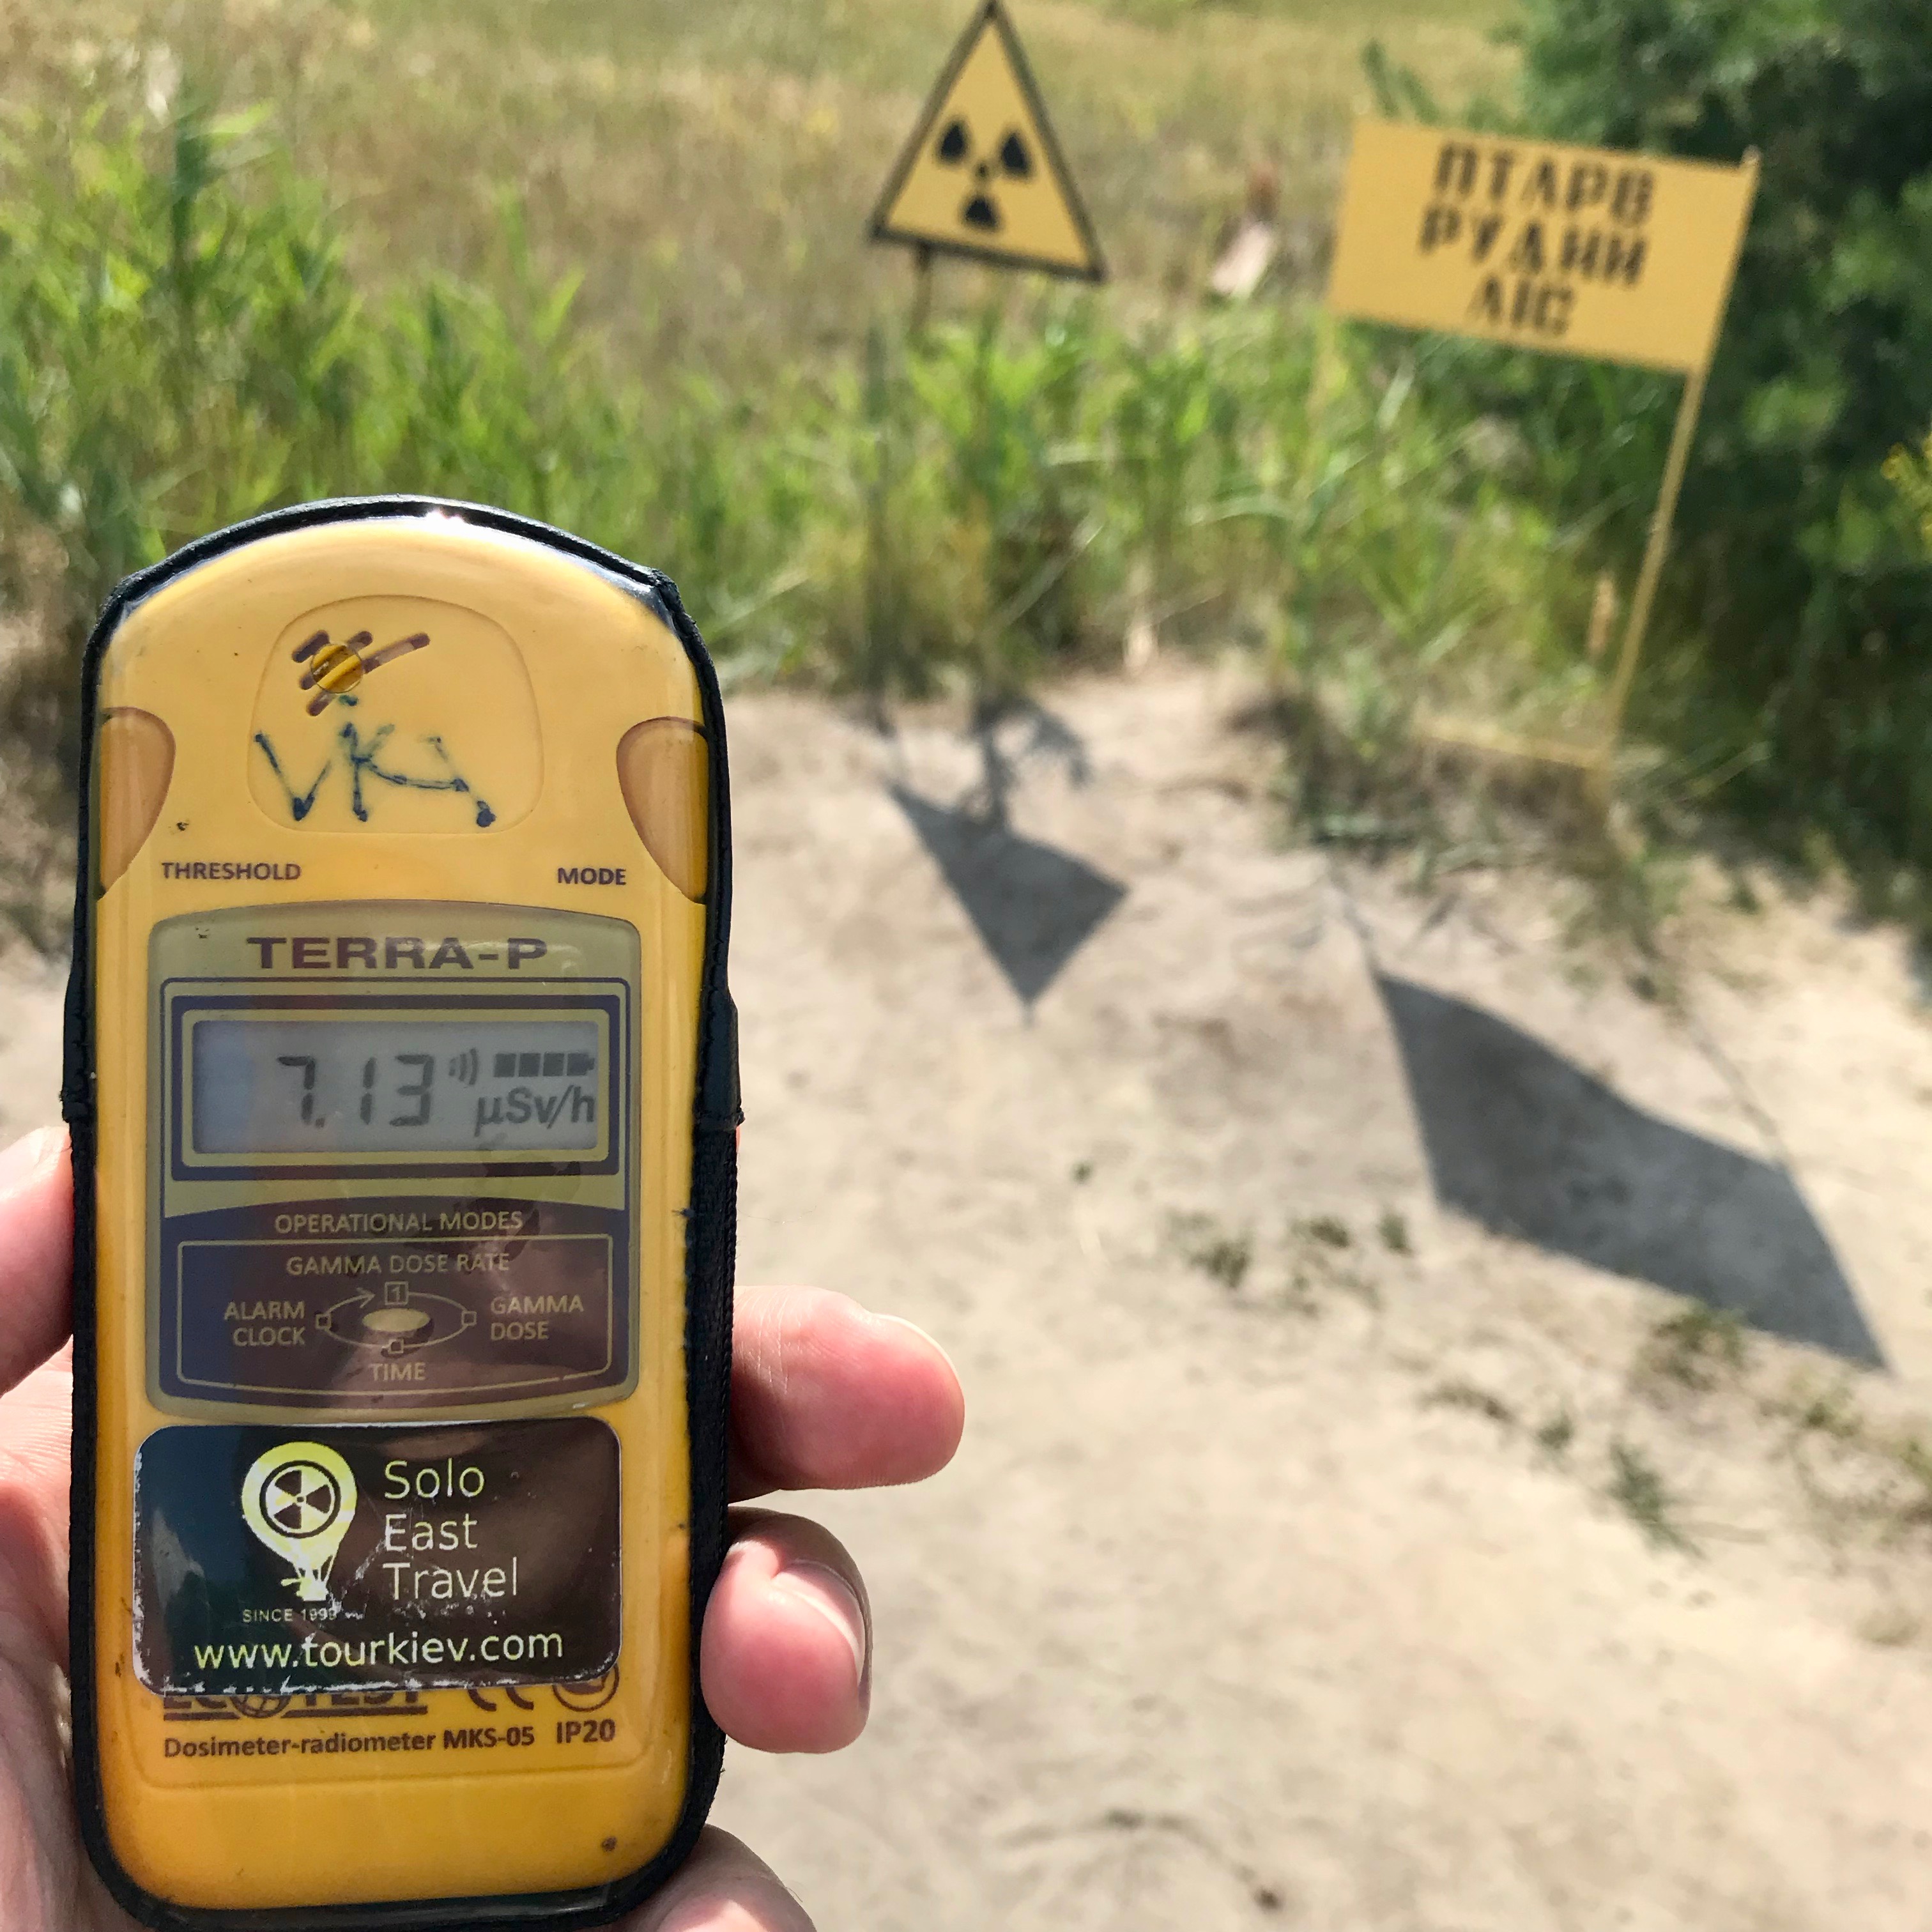 A yellow Geiger counter with the level of radiation in the area, which in this case is displayed at 7.13.  I'm holding this device above an area that was used to bury all the radioactive trees of the forest.  The ground is a dusty brown with a field of grasses in the periphery.  